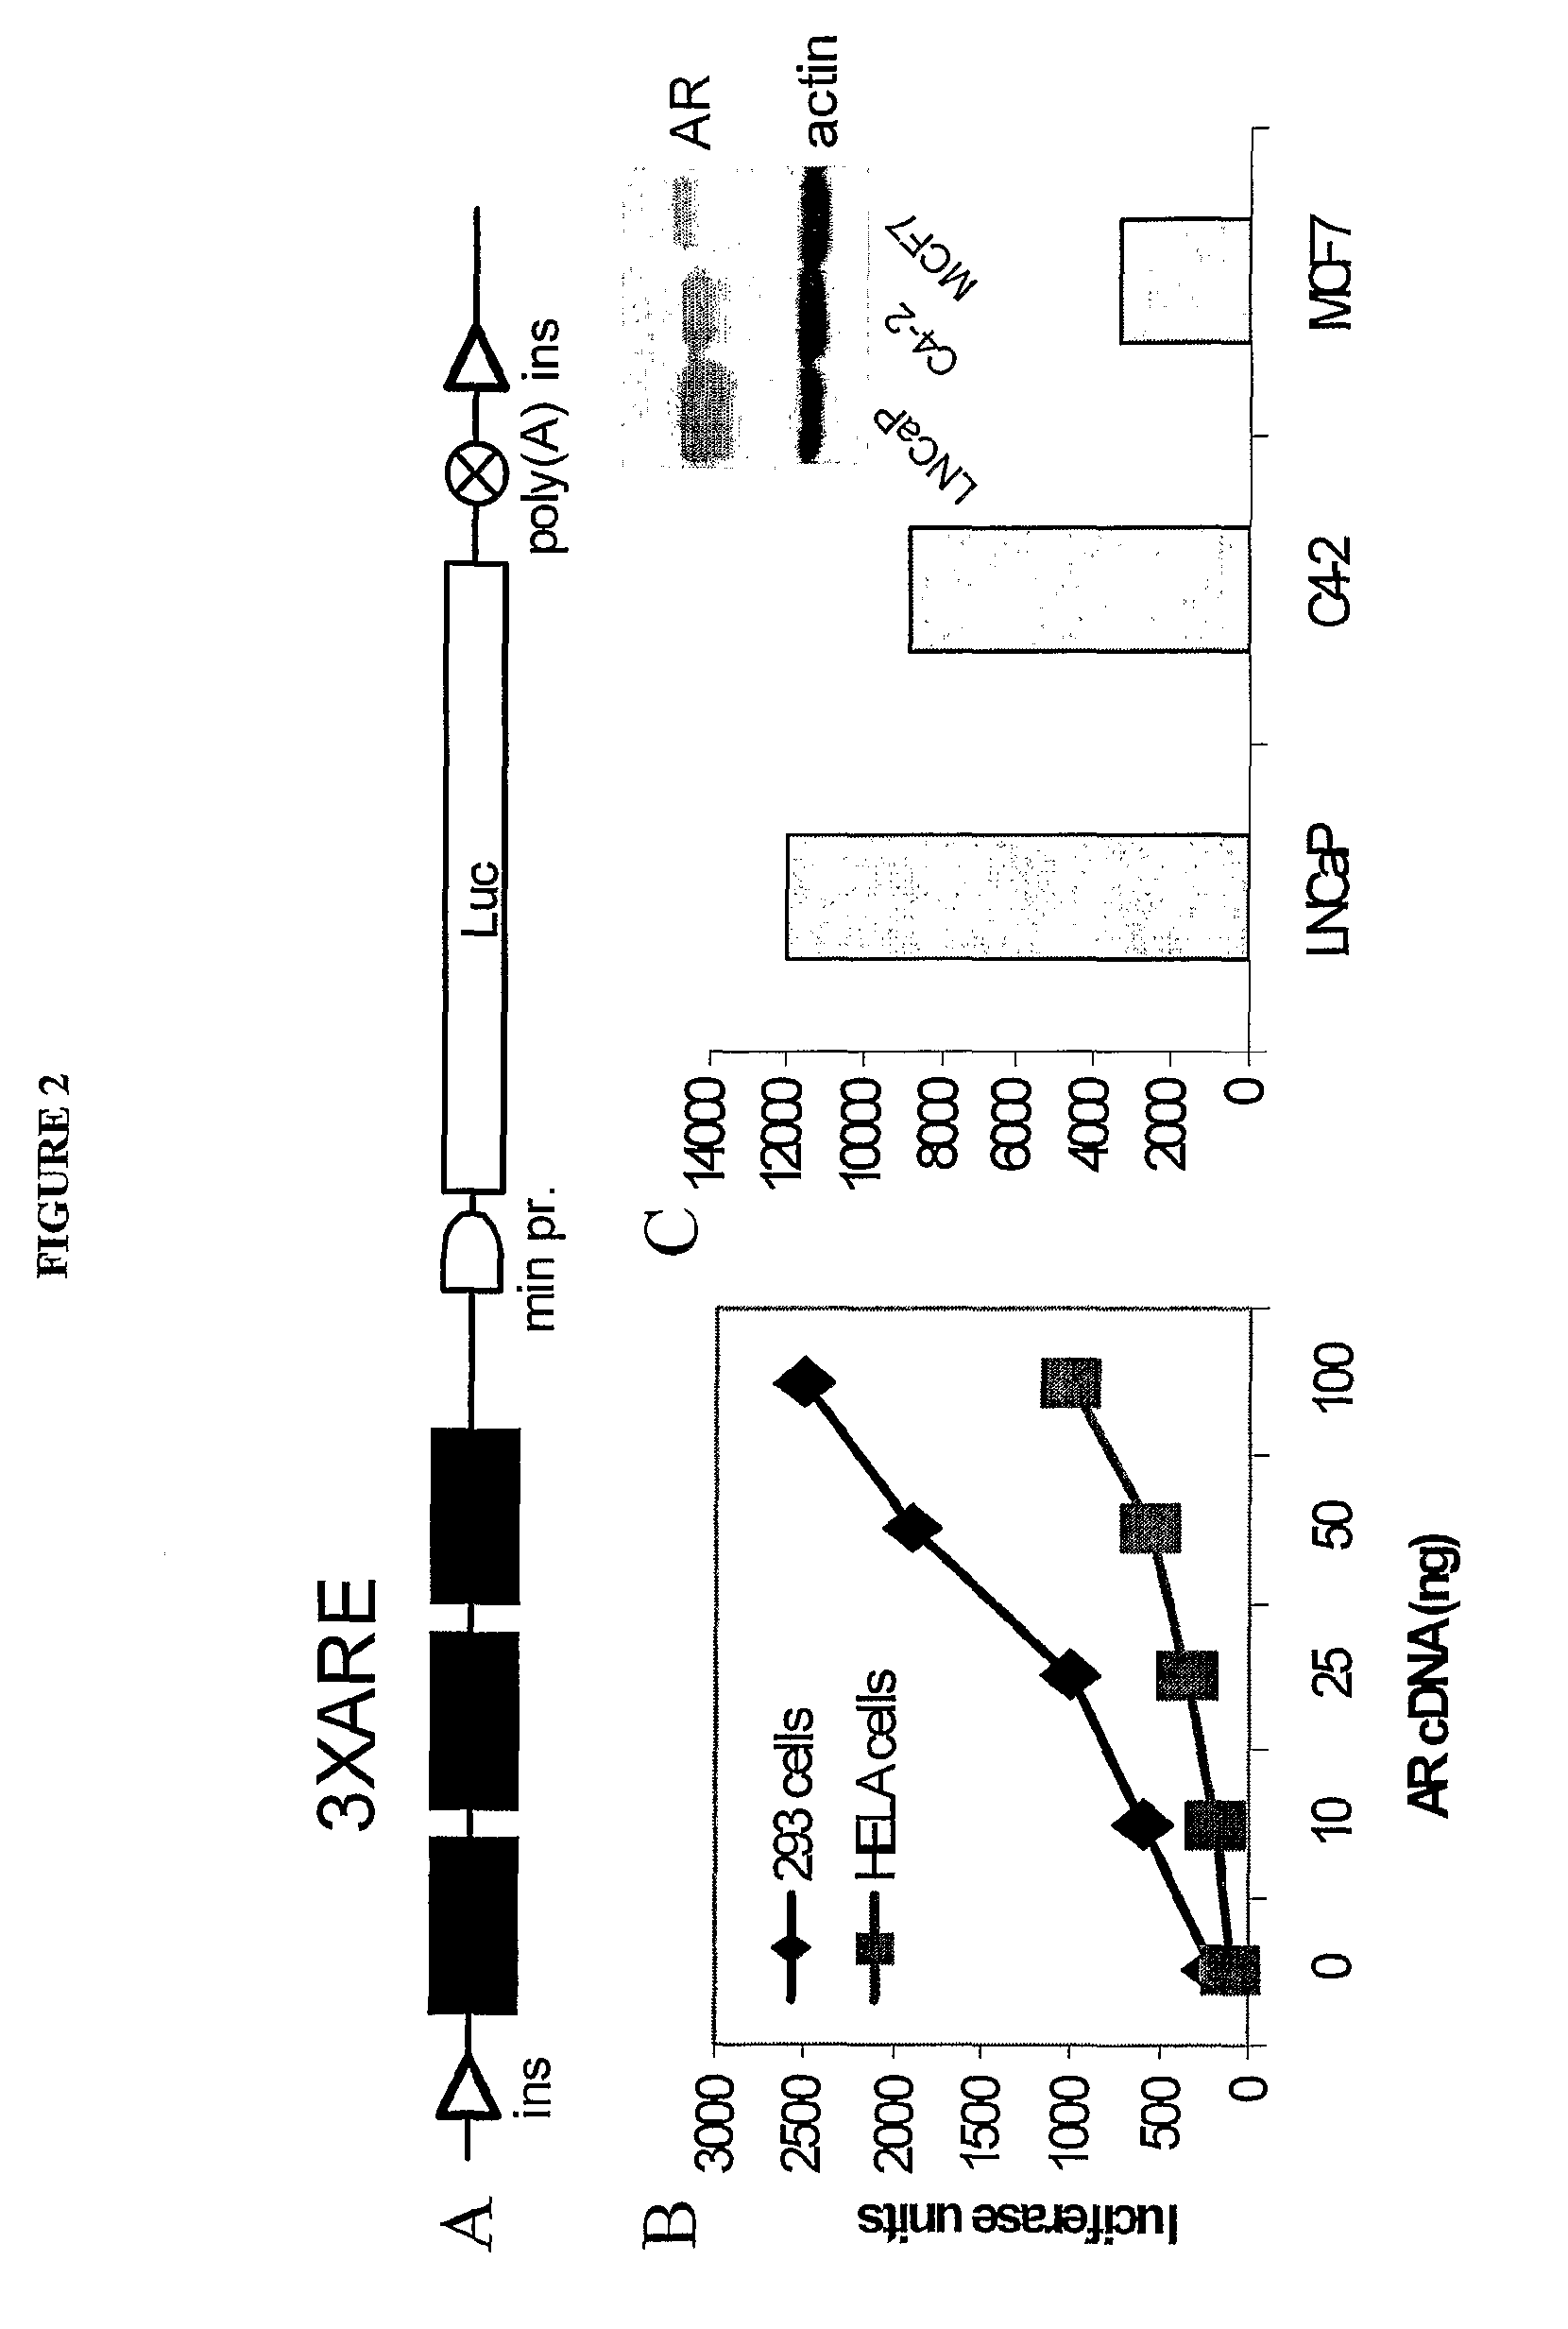 Modulation of Androgen Receptor for Treatment of Prostate Cancer